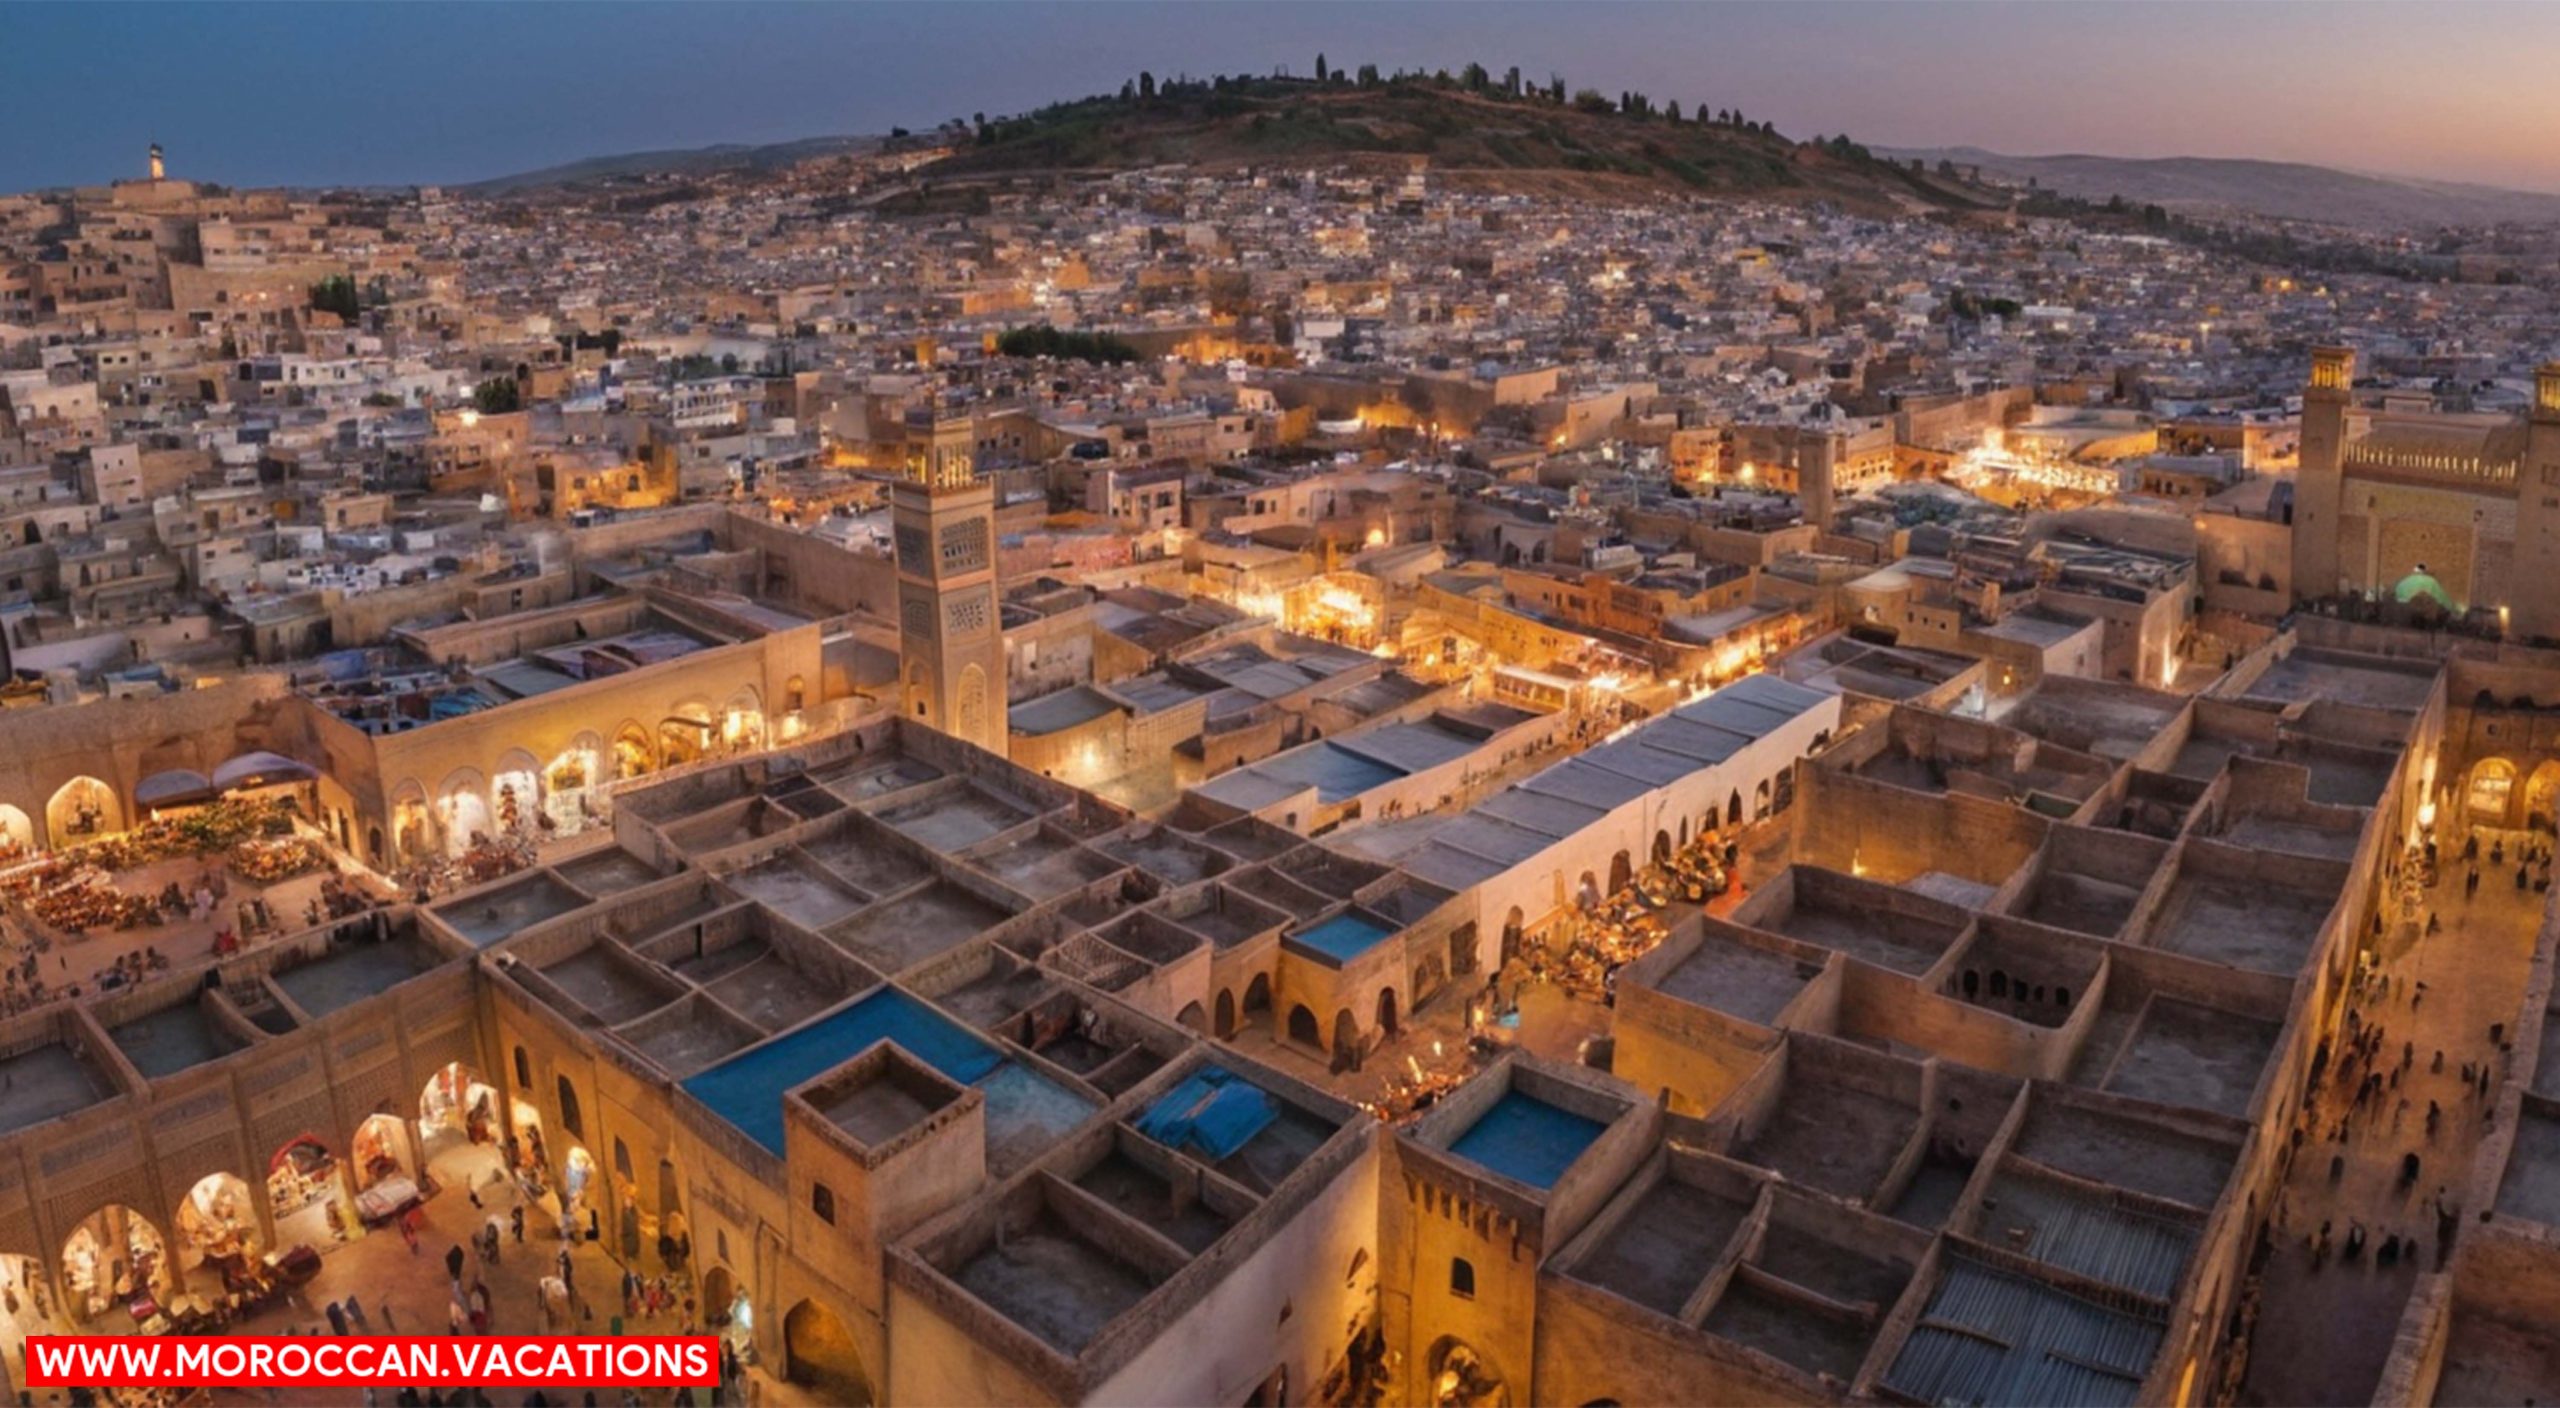 The sprawling Medina of Fez, with intertwined alleyways, ancient mosques.